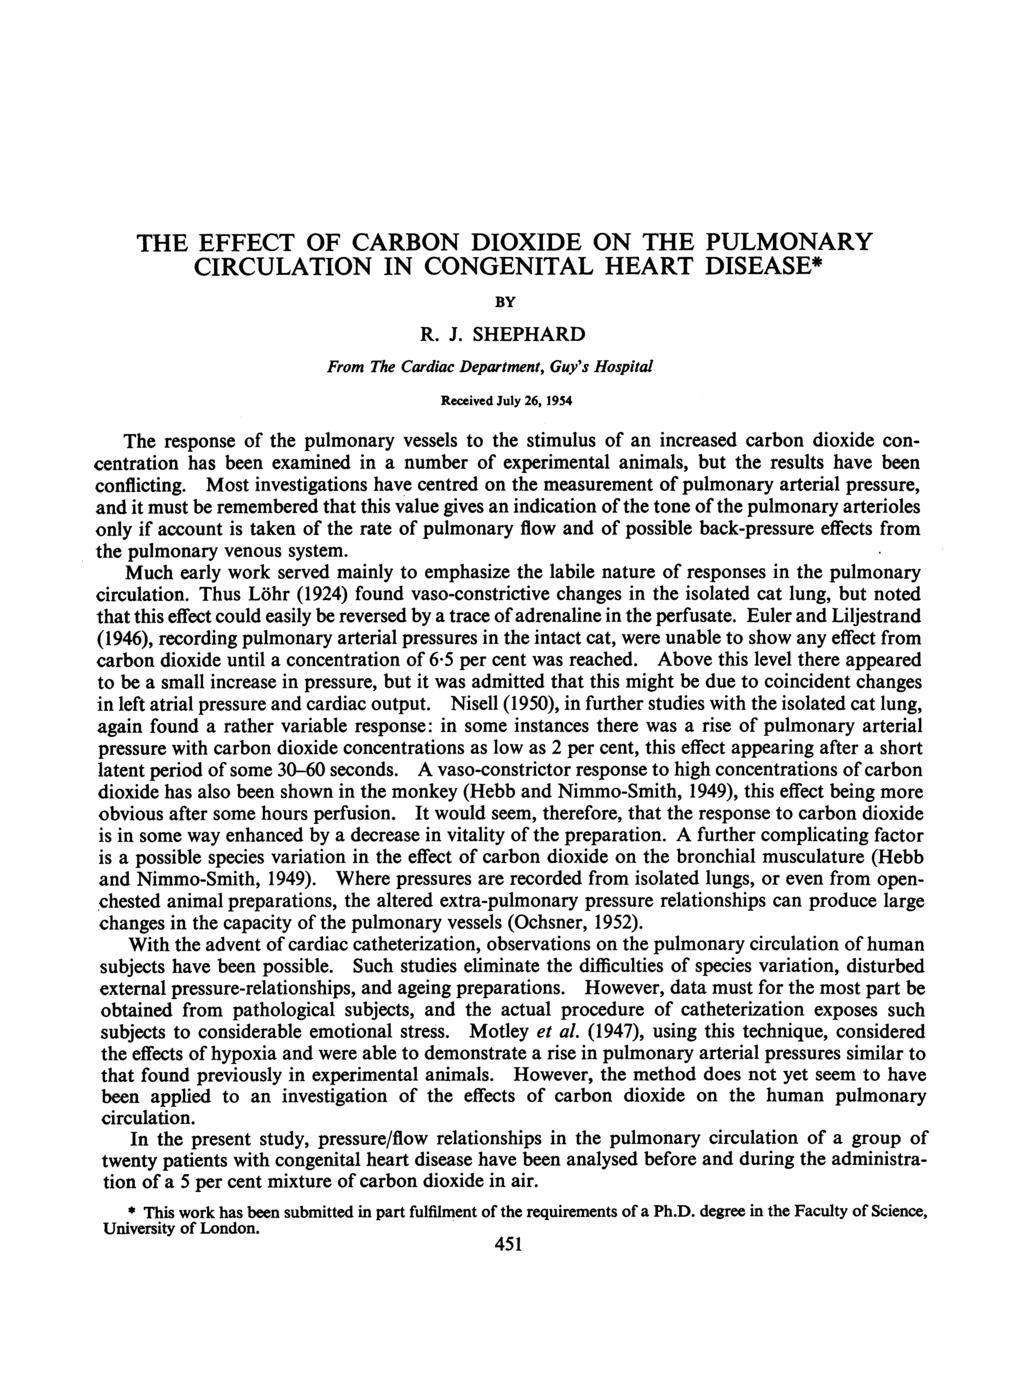 THE EFFECT OF CARBON DIOXIDE ON THE PULMONARY CIRCULATION IN CONGENITAL HEART DISEASE* BY R. J.